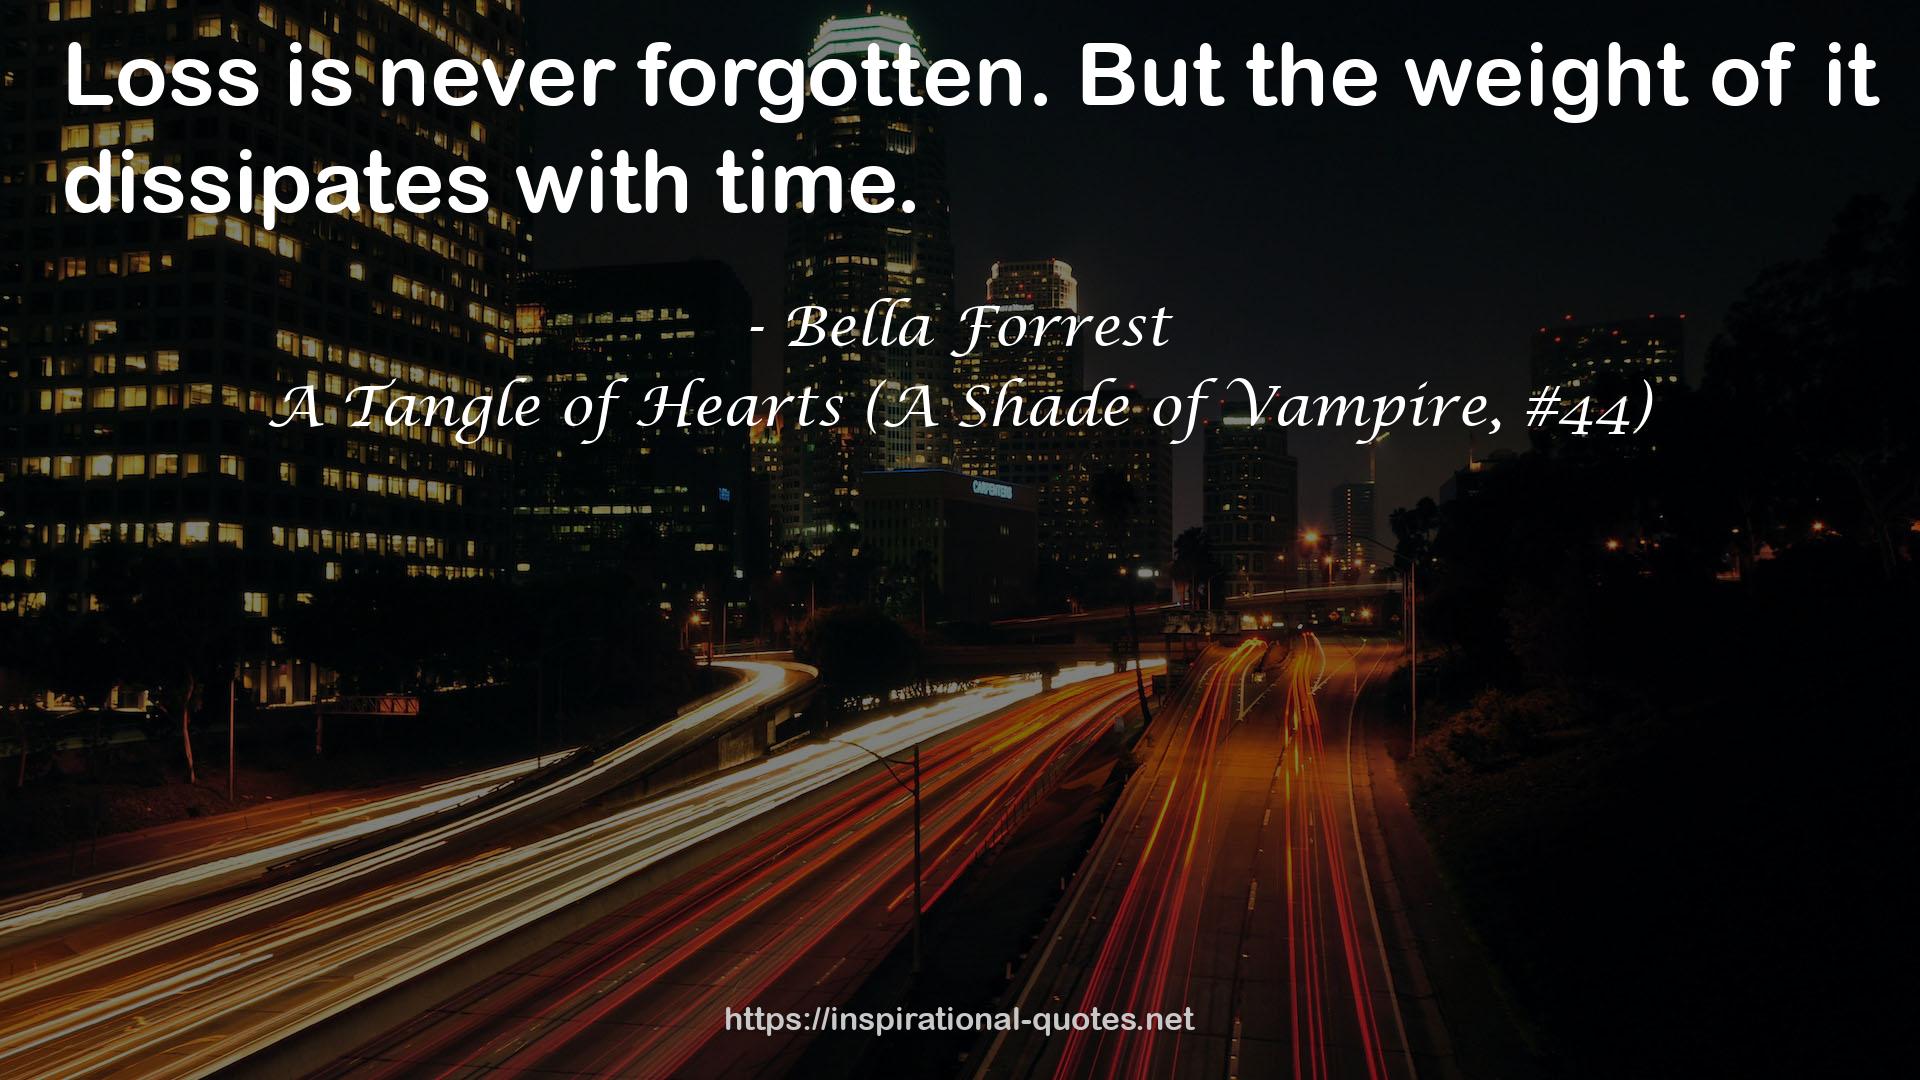 A Tangle of Hearts (A Shade of Vampire, #44) QUOTES